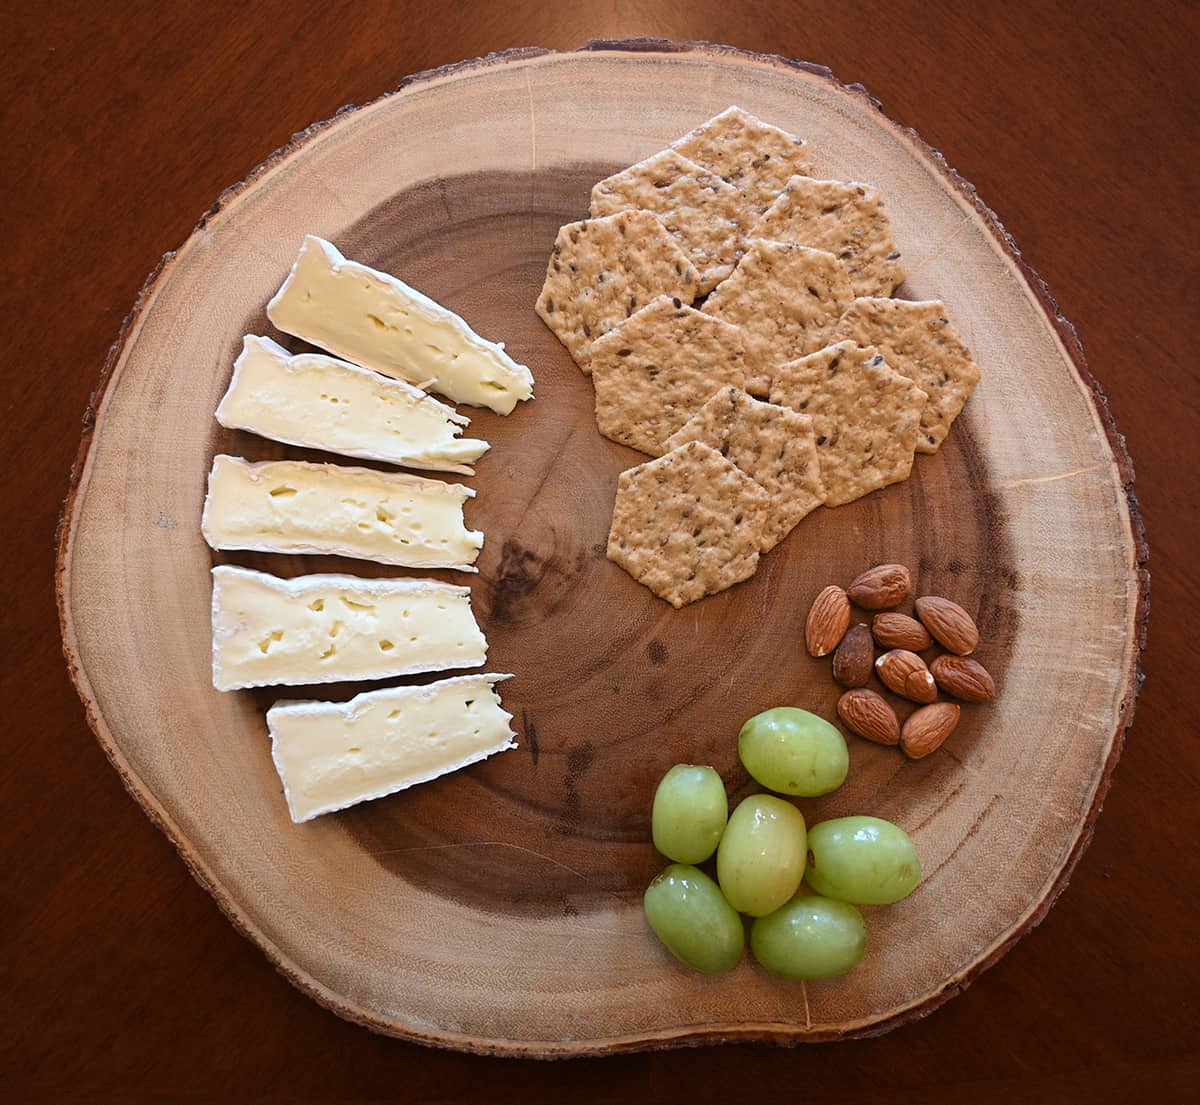 Top down image of a cheese board with Brie, crackers, almonds and grapes on it.